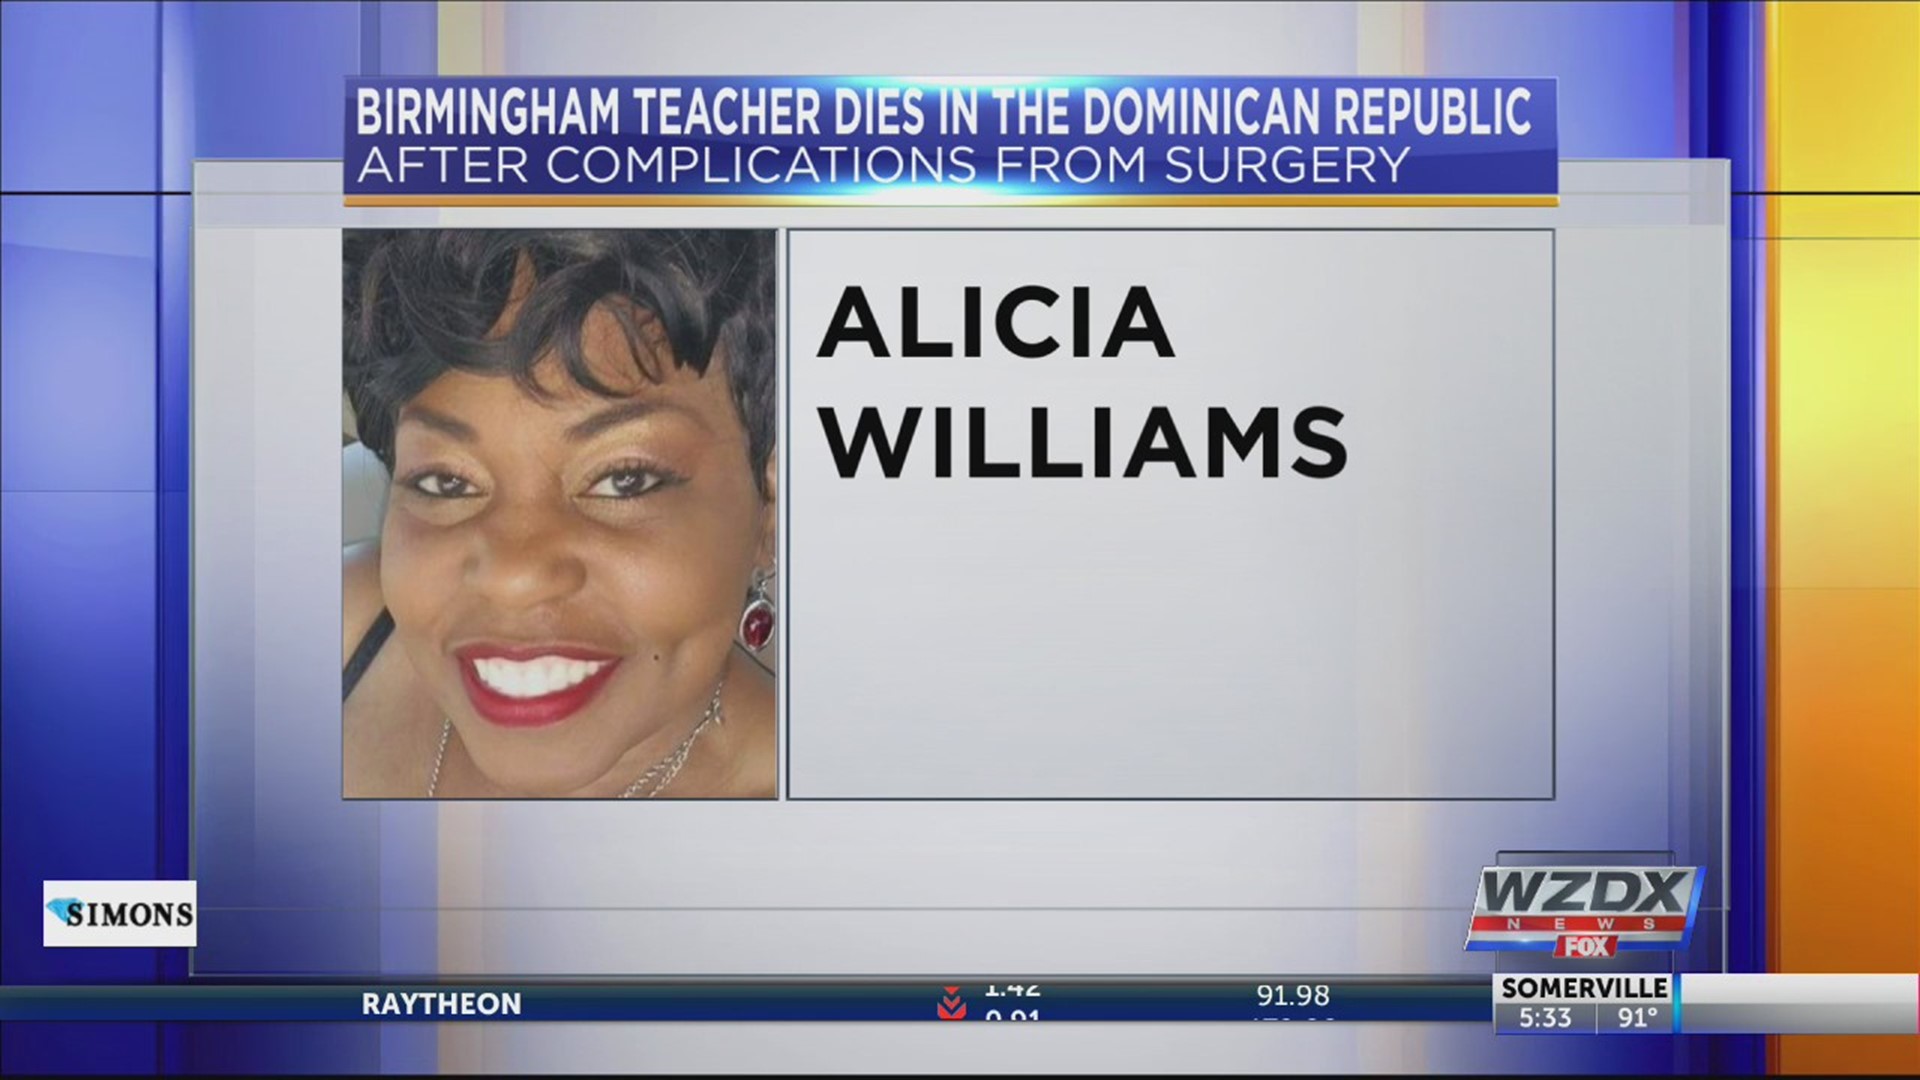 The Birmingham community is mourning the loss of a teacher who died hundreds of miles away from home.